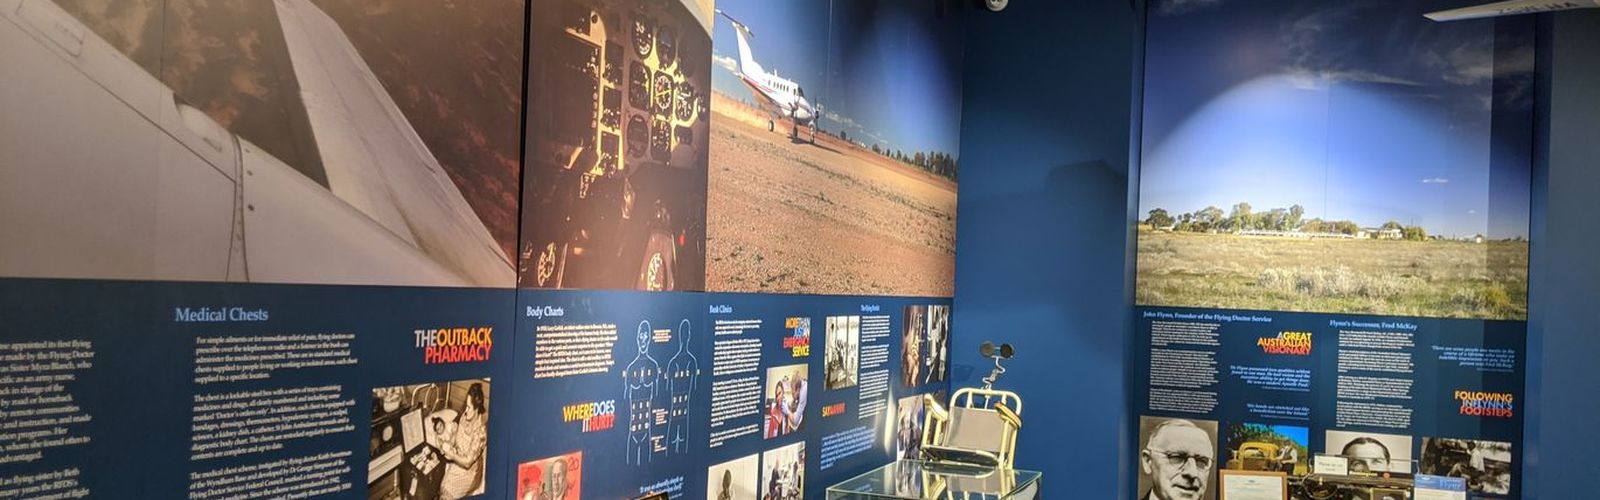 Royal Flying Doctor Service Broken Hill's Outback Heritage Experience is a must-visit